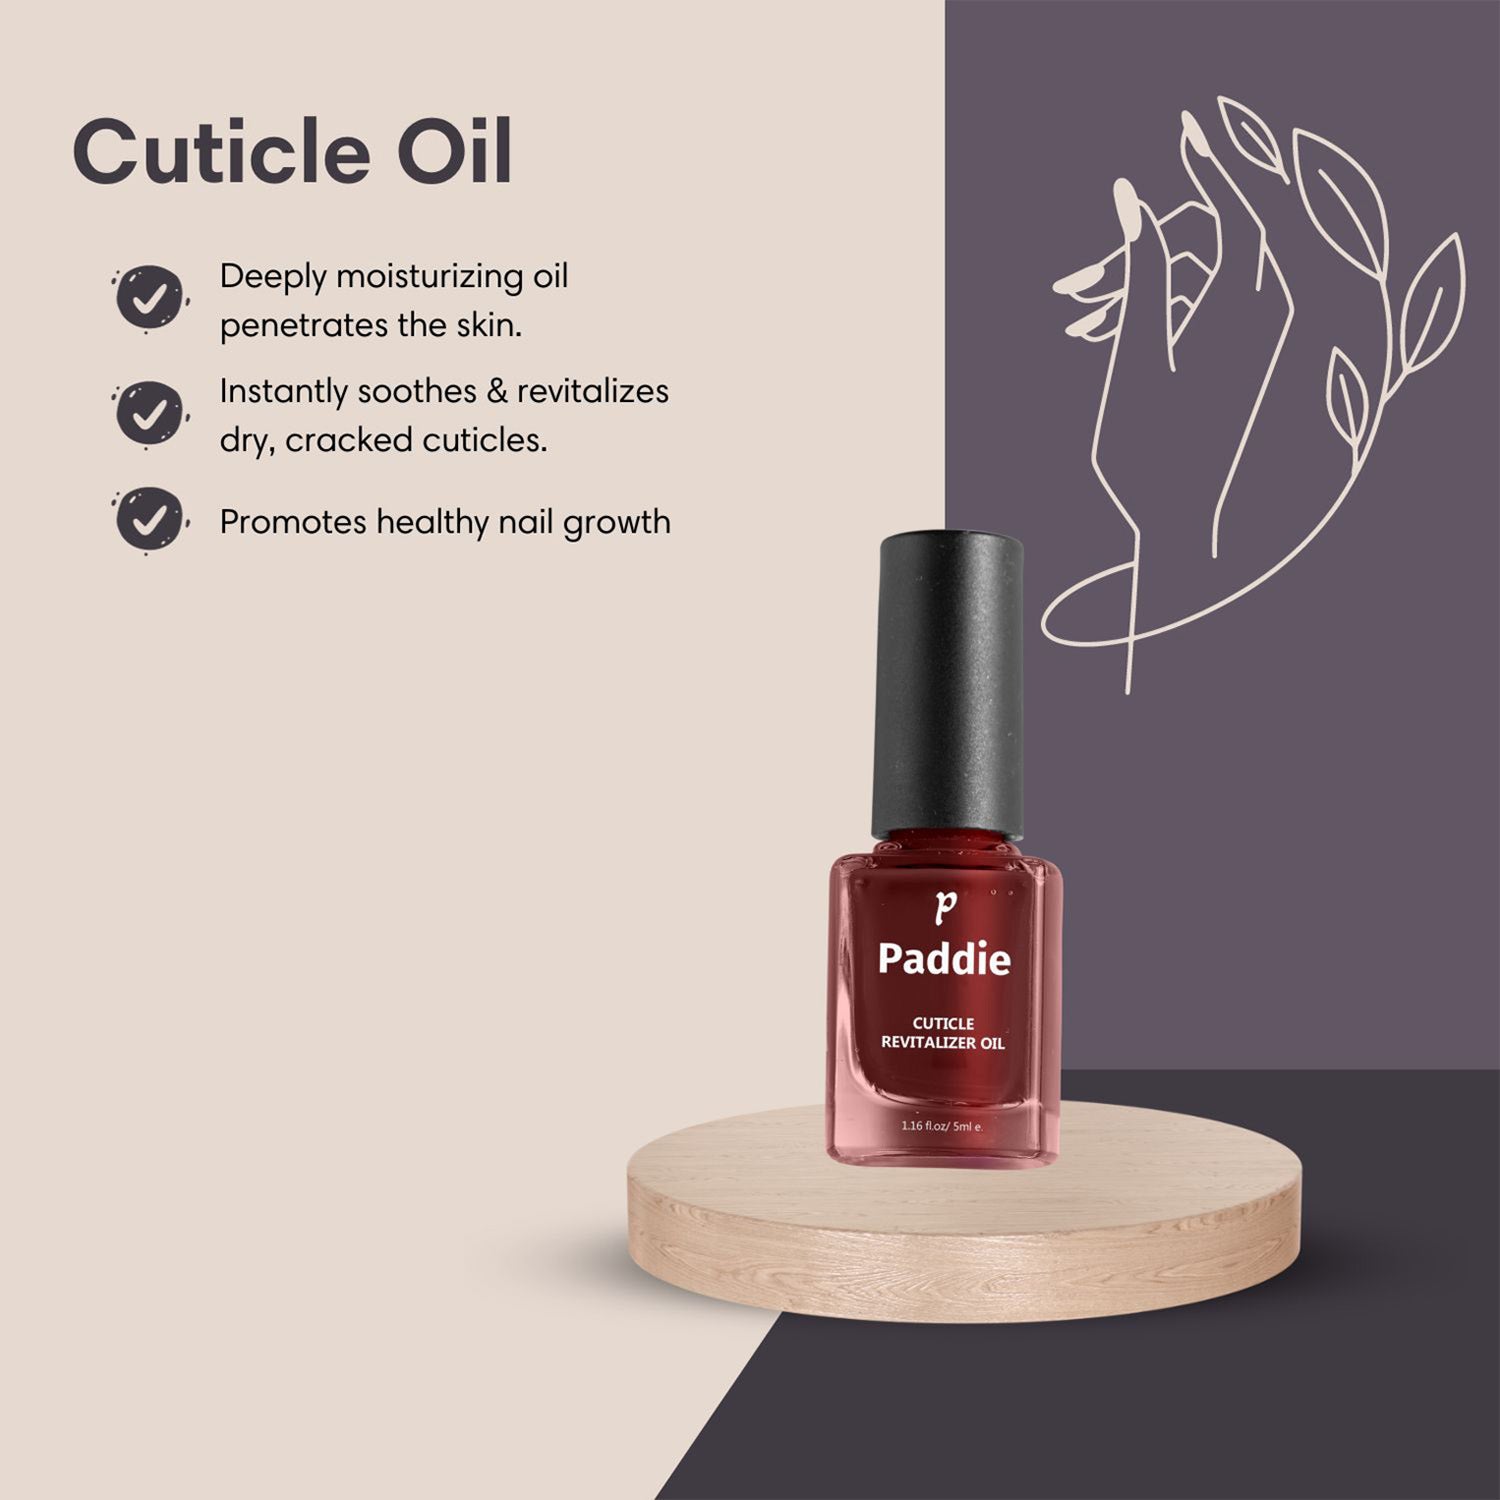 Deeply moisturizing Cuticle Oil for healthy cuticles. Soothes dryness, repairs cracks, and promotes strong nail growth